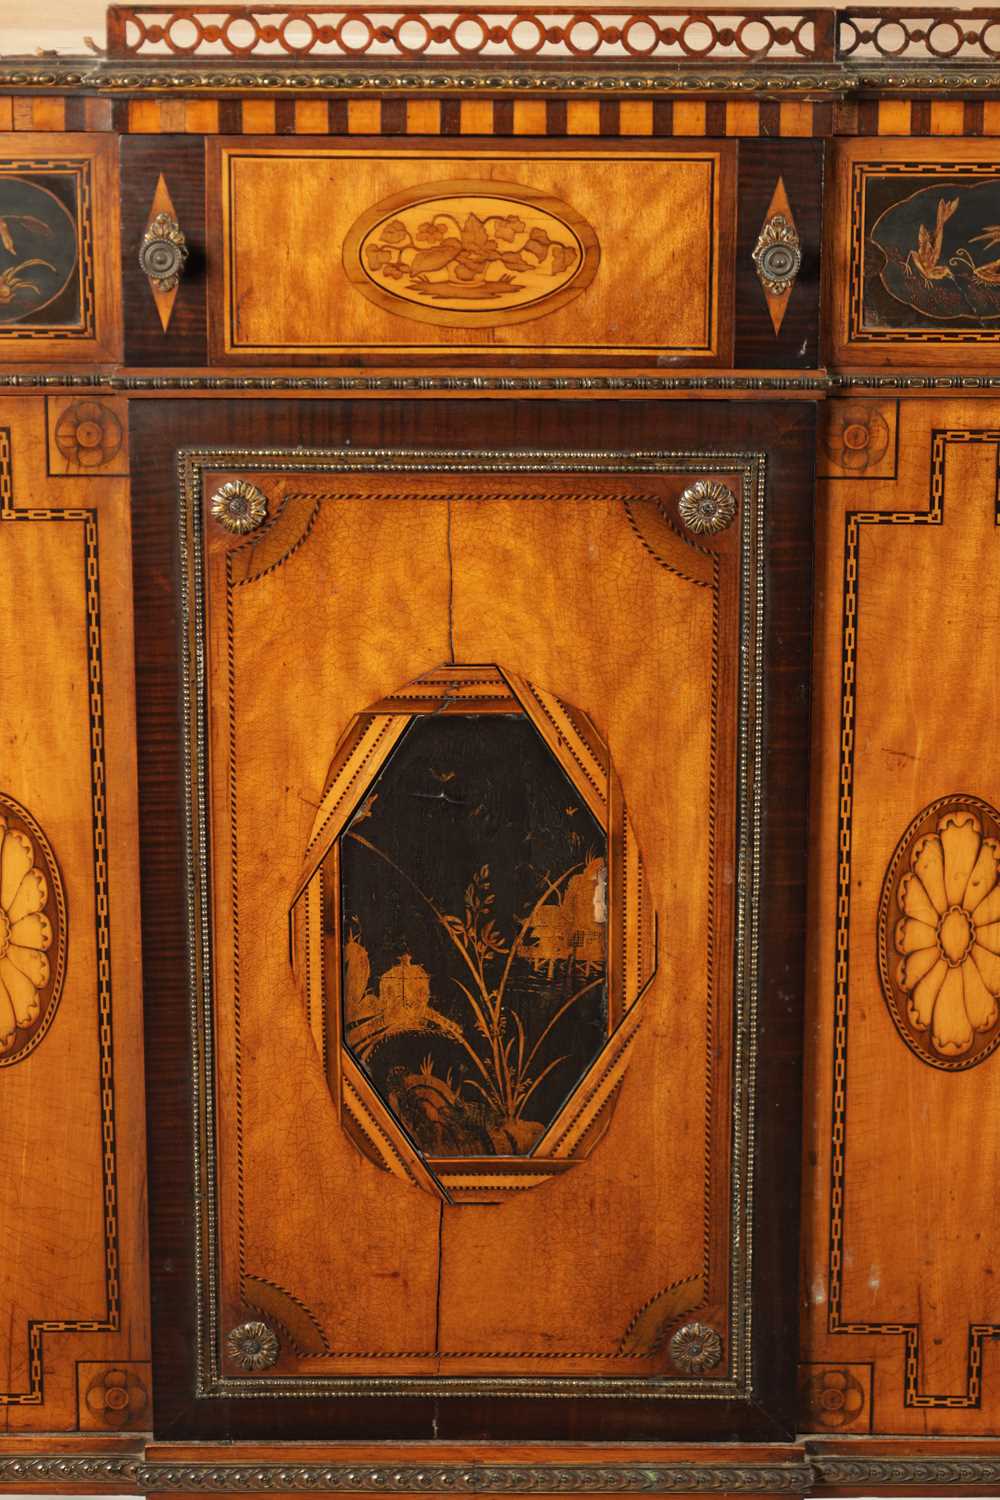 A FINE PAIR OF 18TH CENTURY CONTINENTAL SATINWOOD AND MAHOGANY LACQUERWORK AND INLAID SIDE CABINETS - Image 3 of 15